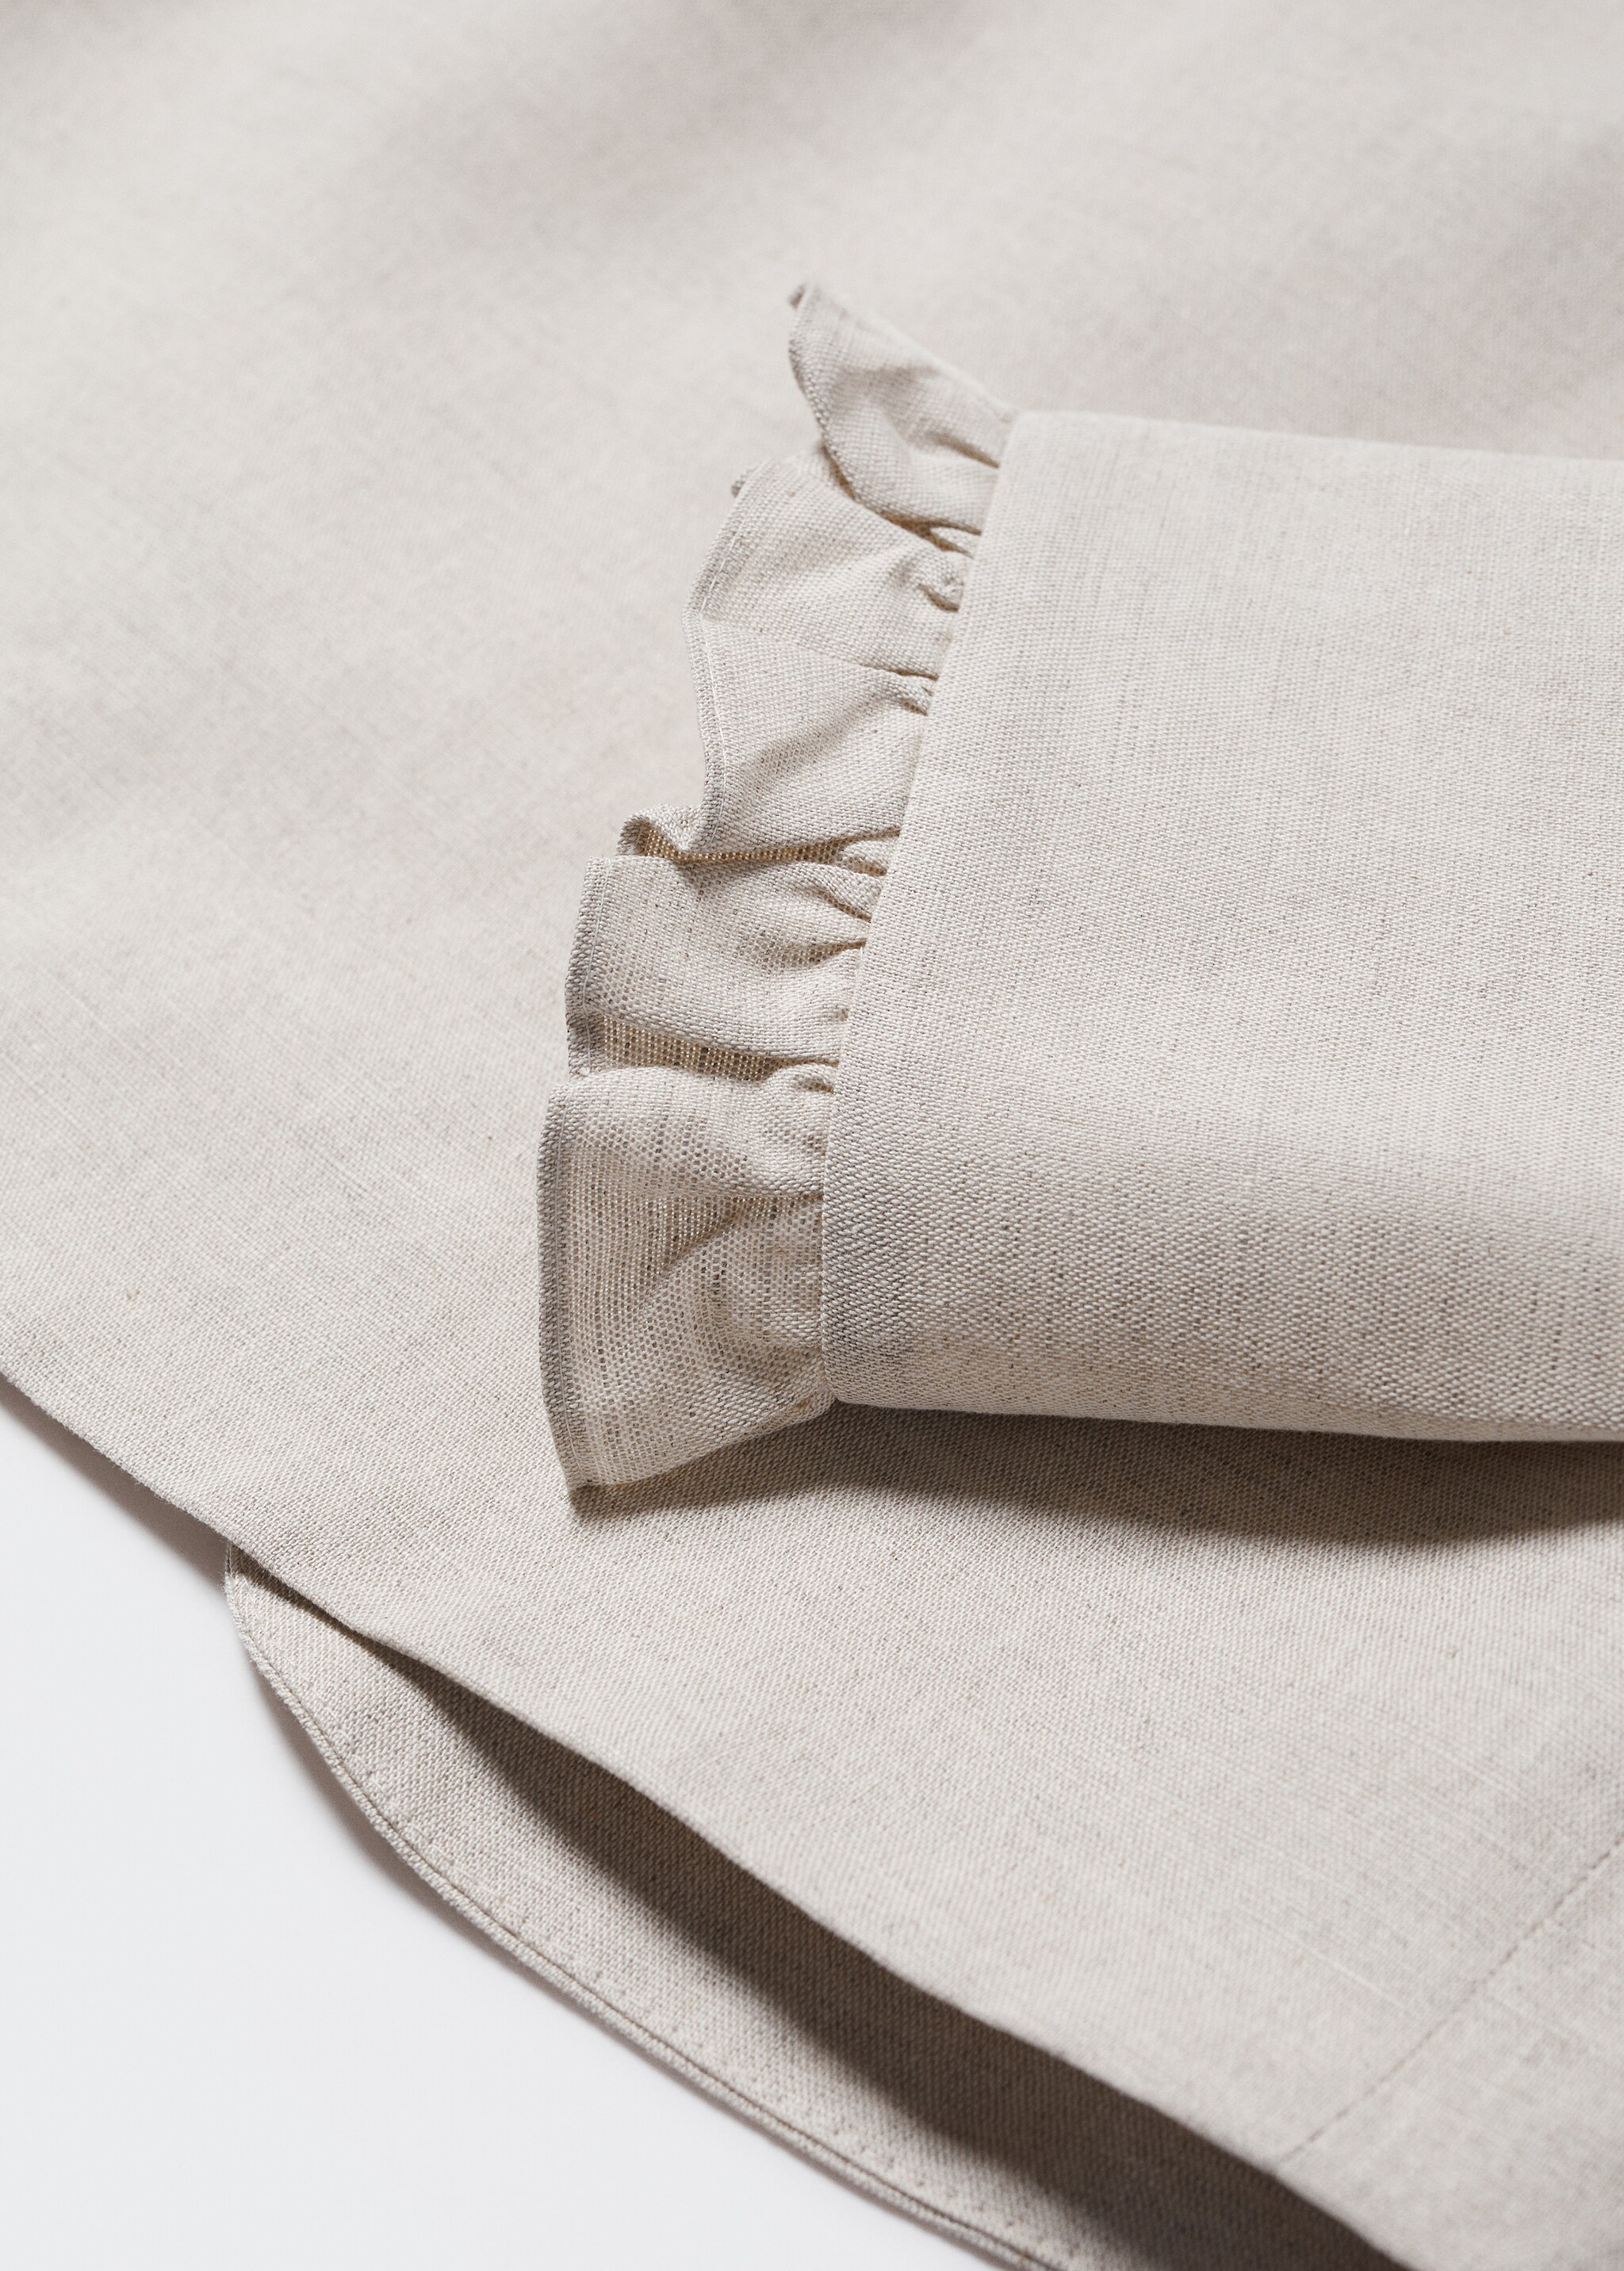 Ruffled linen jacket - Details of the article 0